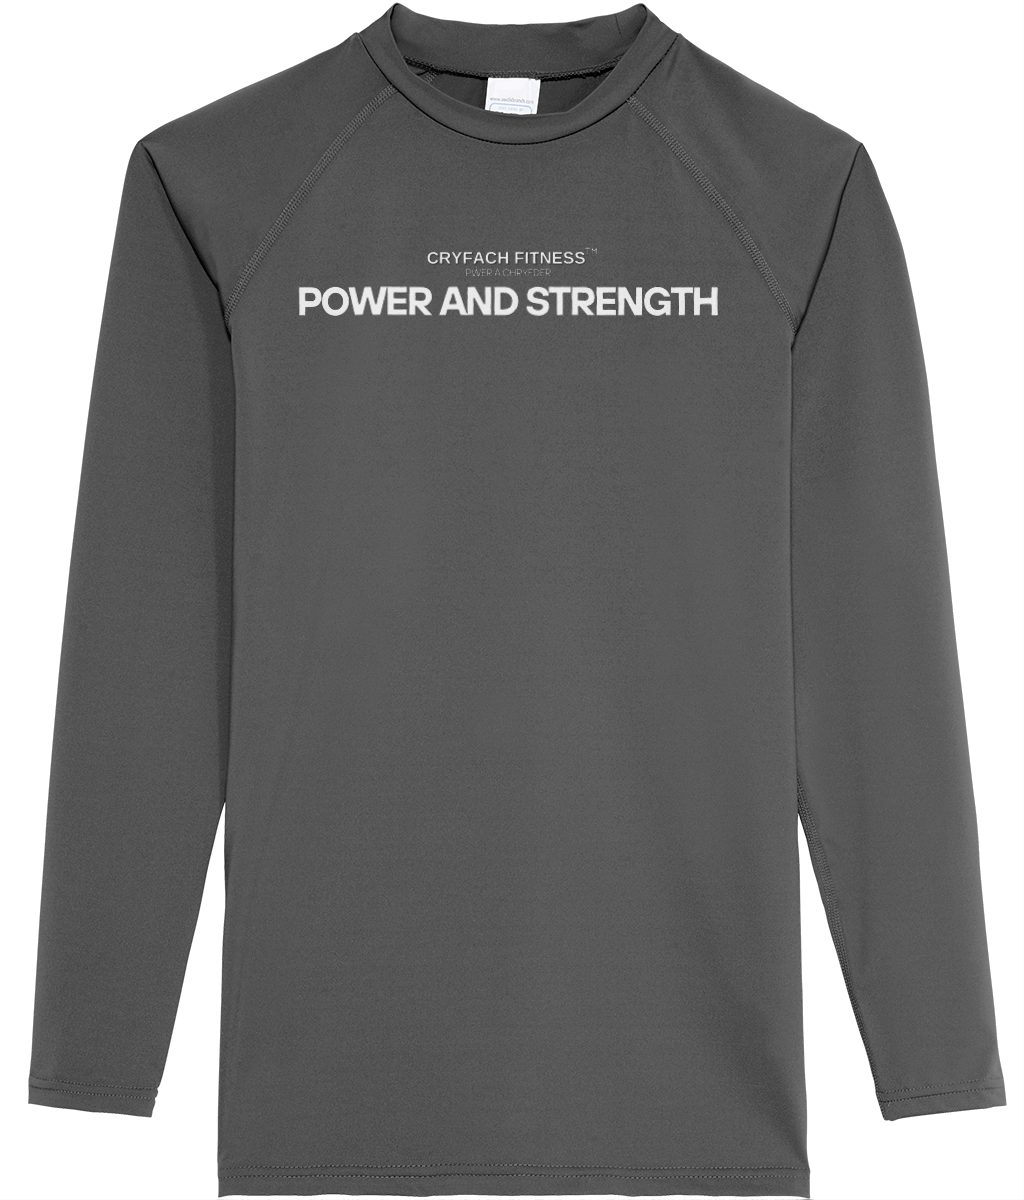 POWER AND STRENGTH LONG SLEEVE PERFORMANCE TOP